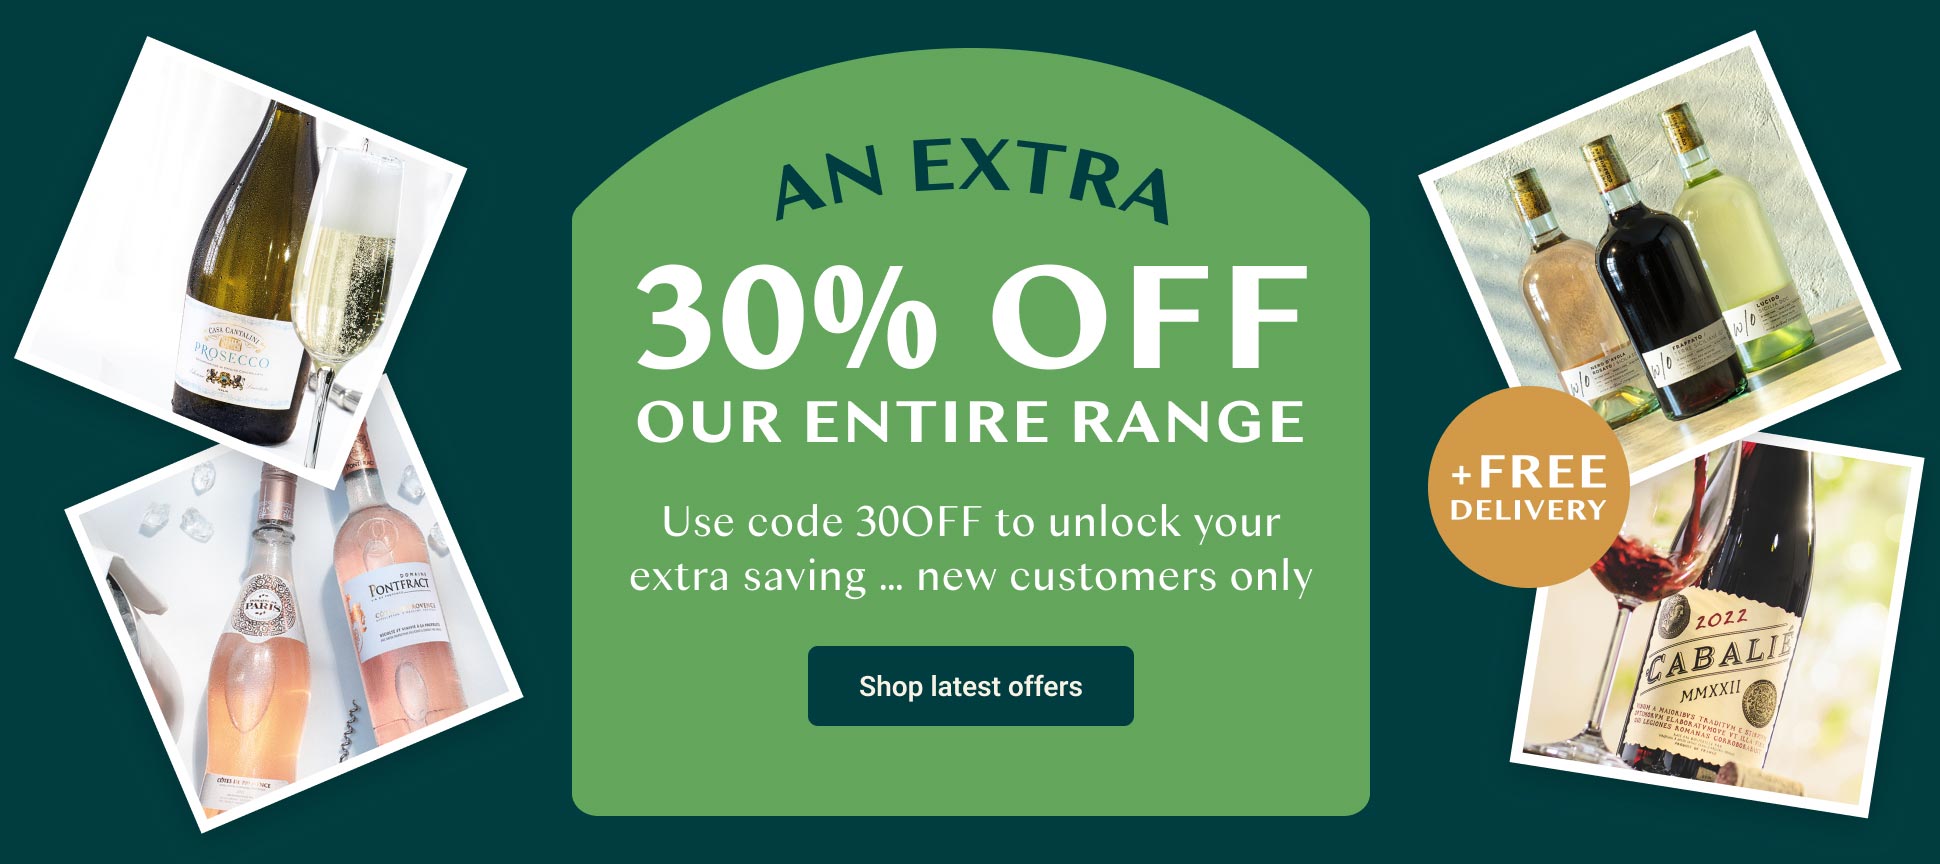 An extra 30% off our entire range